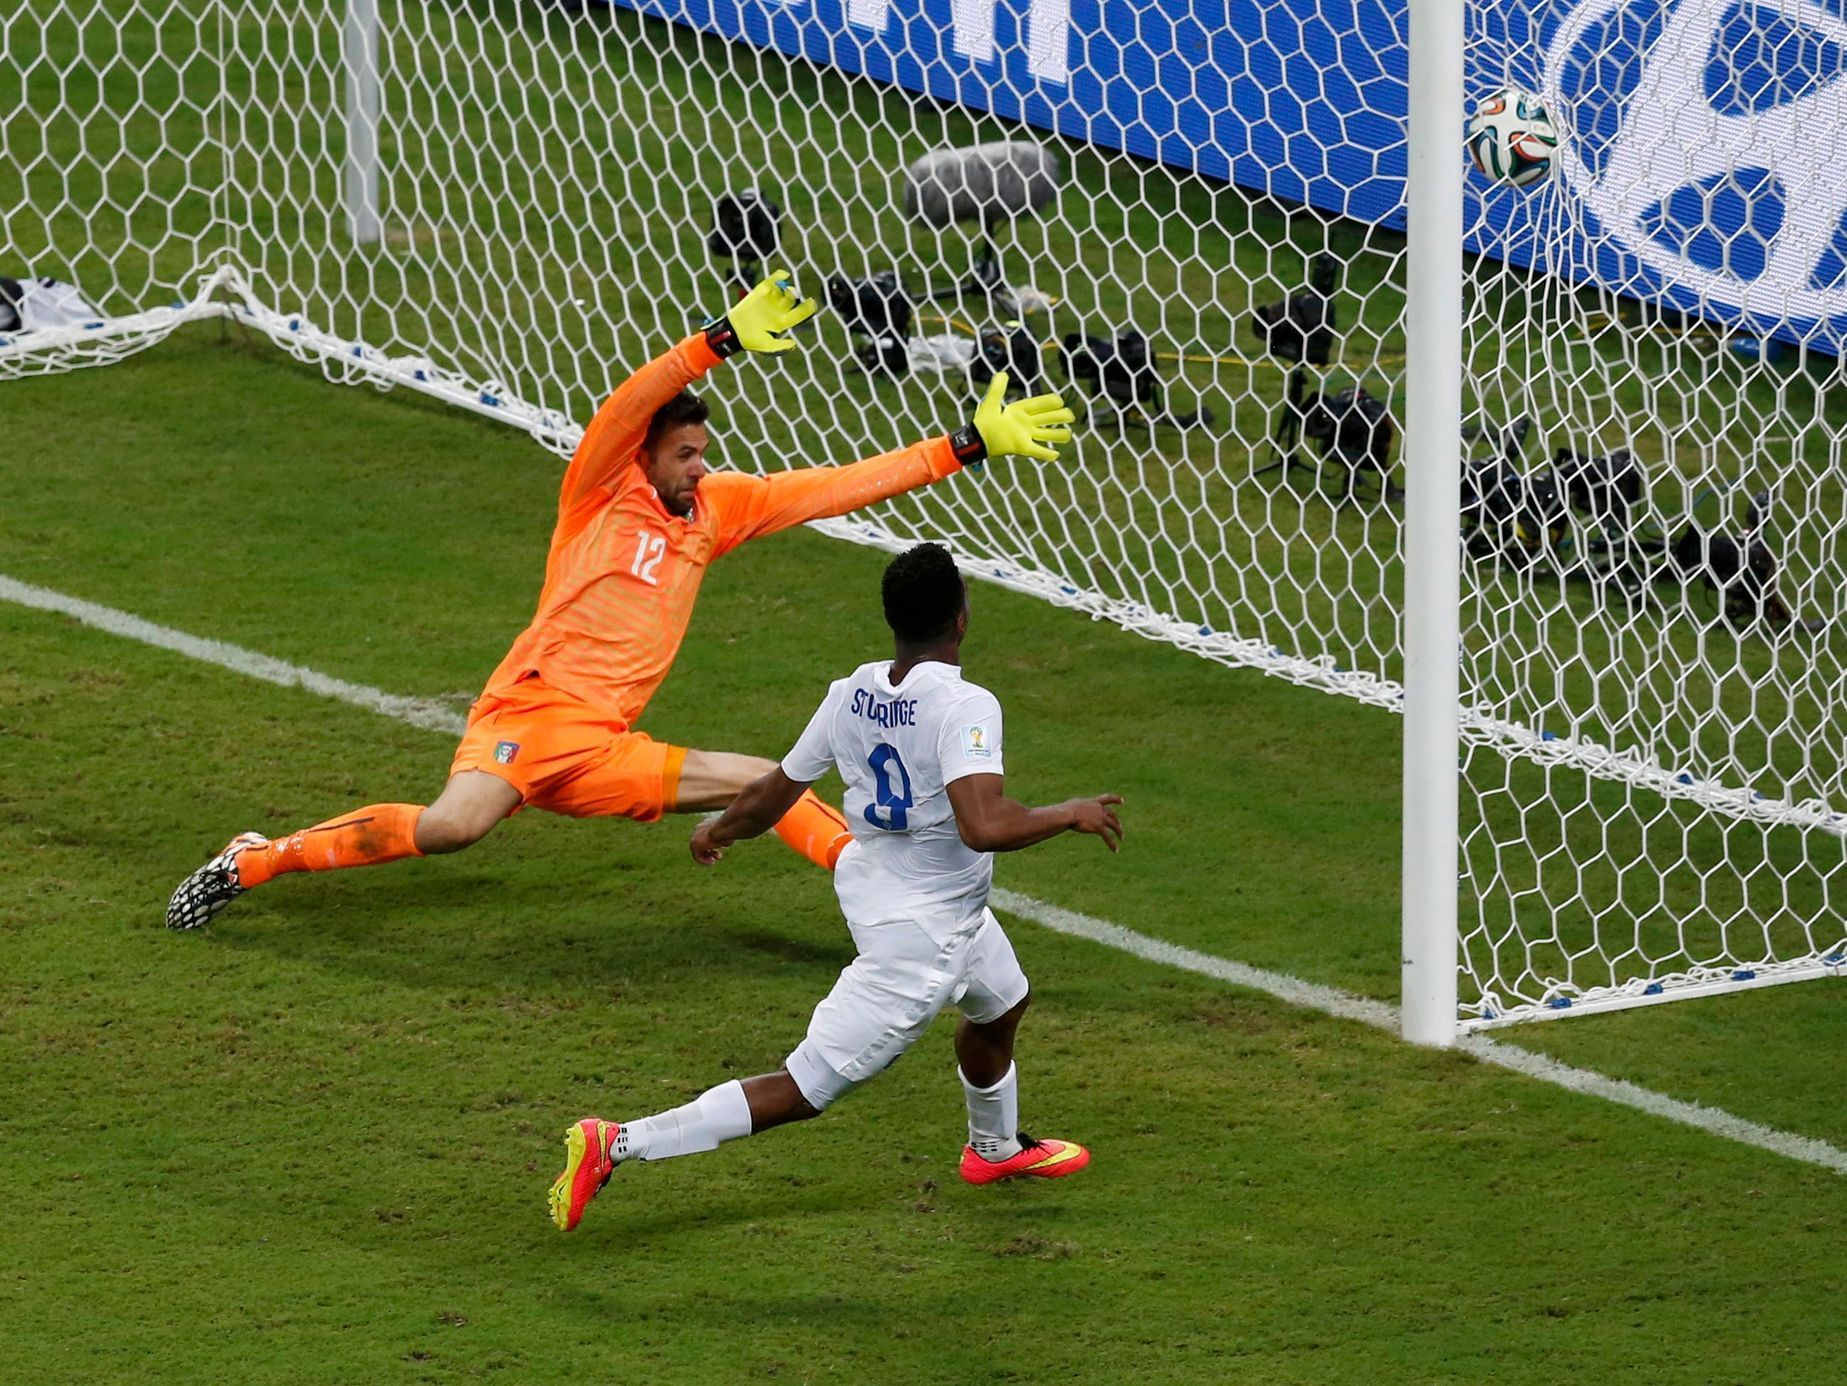 England's Sturridge scores past Italy's goalkeeper Sirigu during their 2014 World Cup Group D soccer match at the Amazonia arena in Manaus